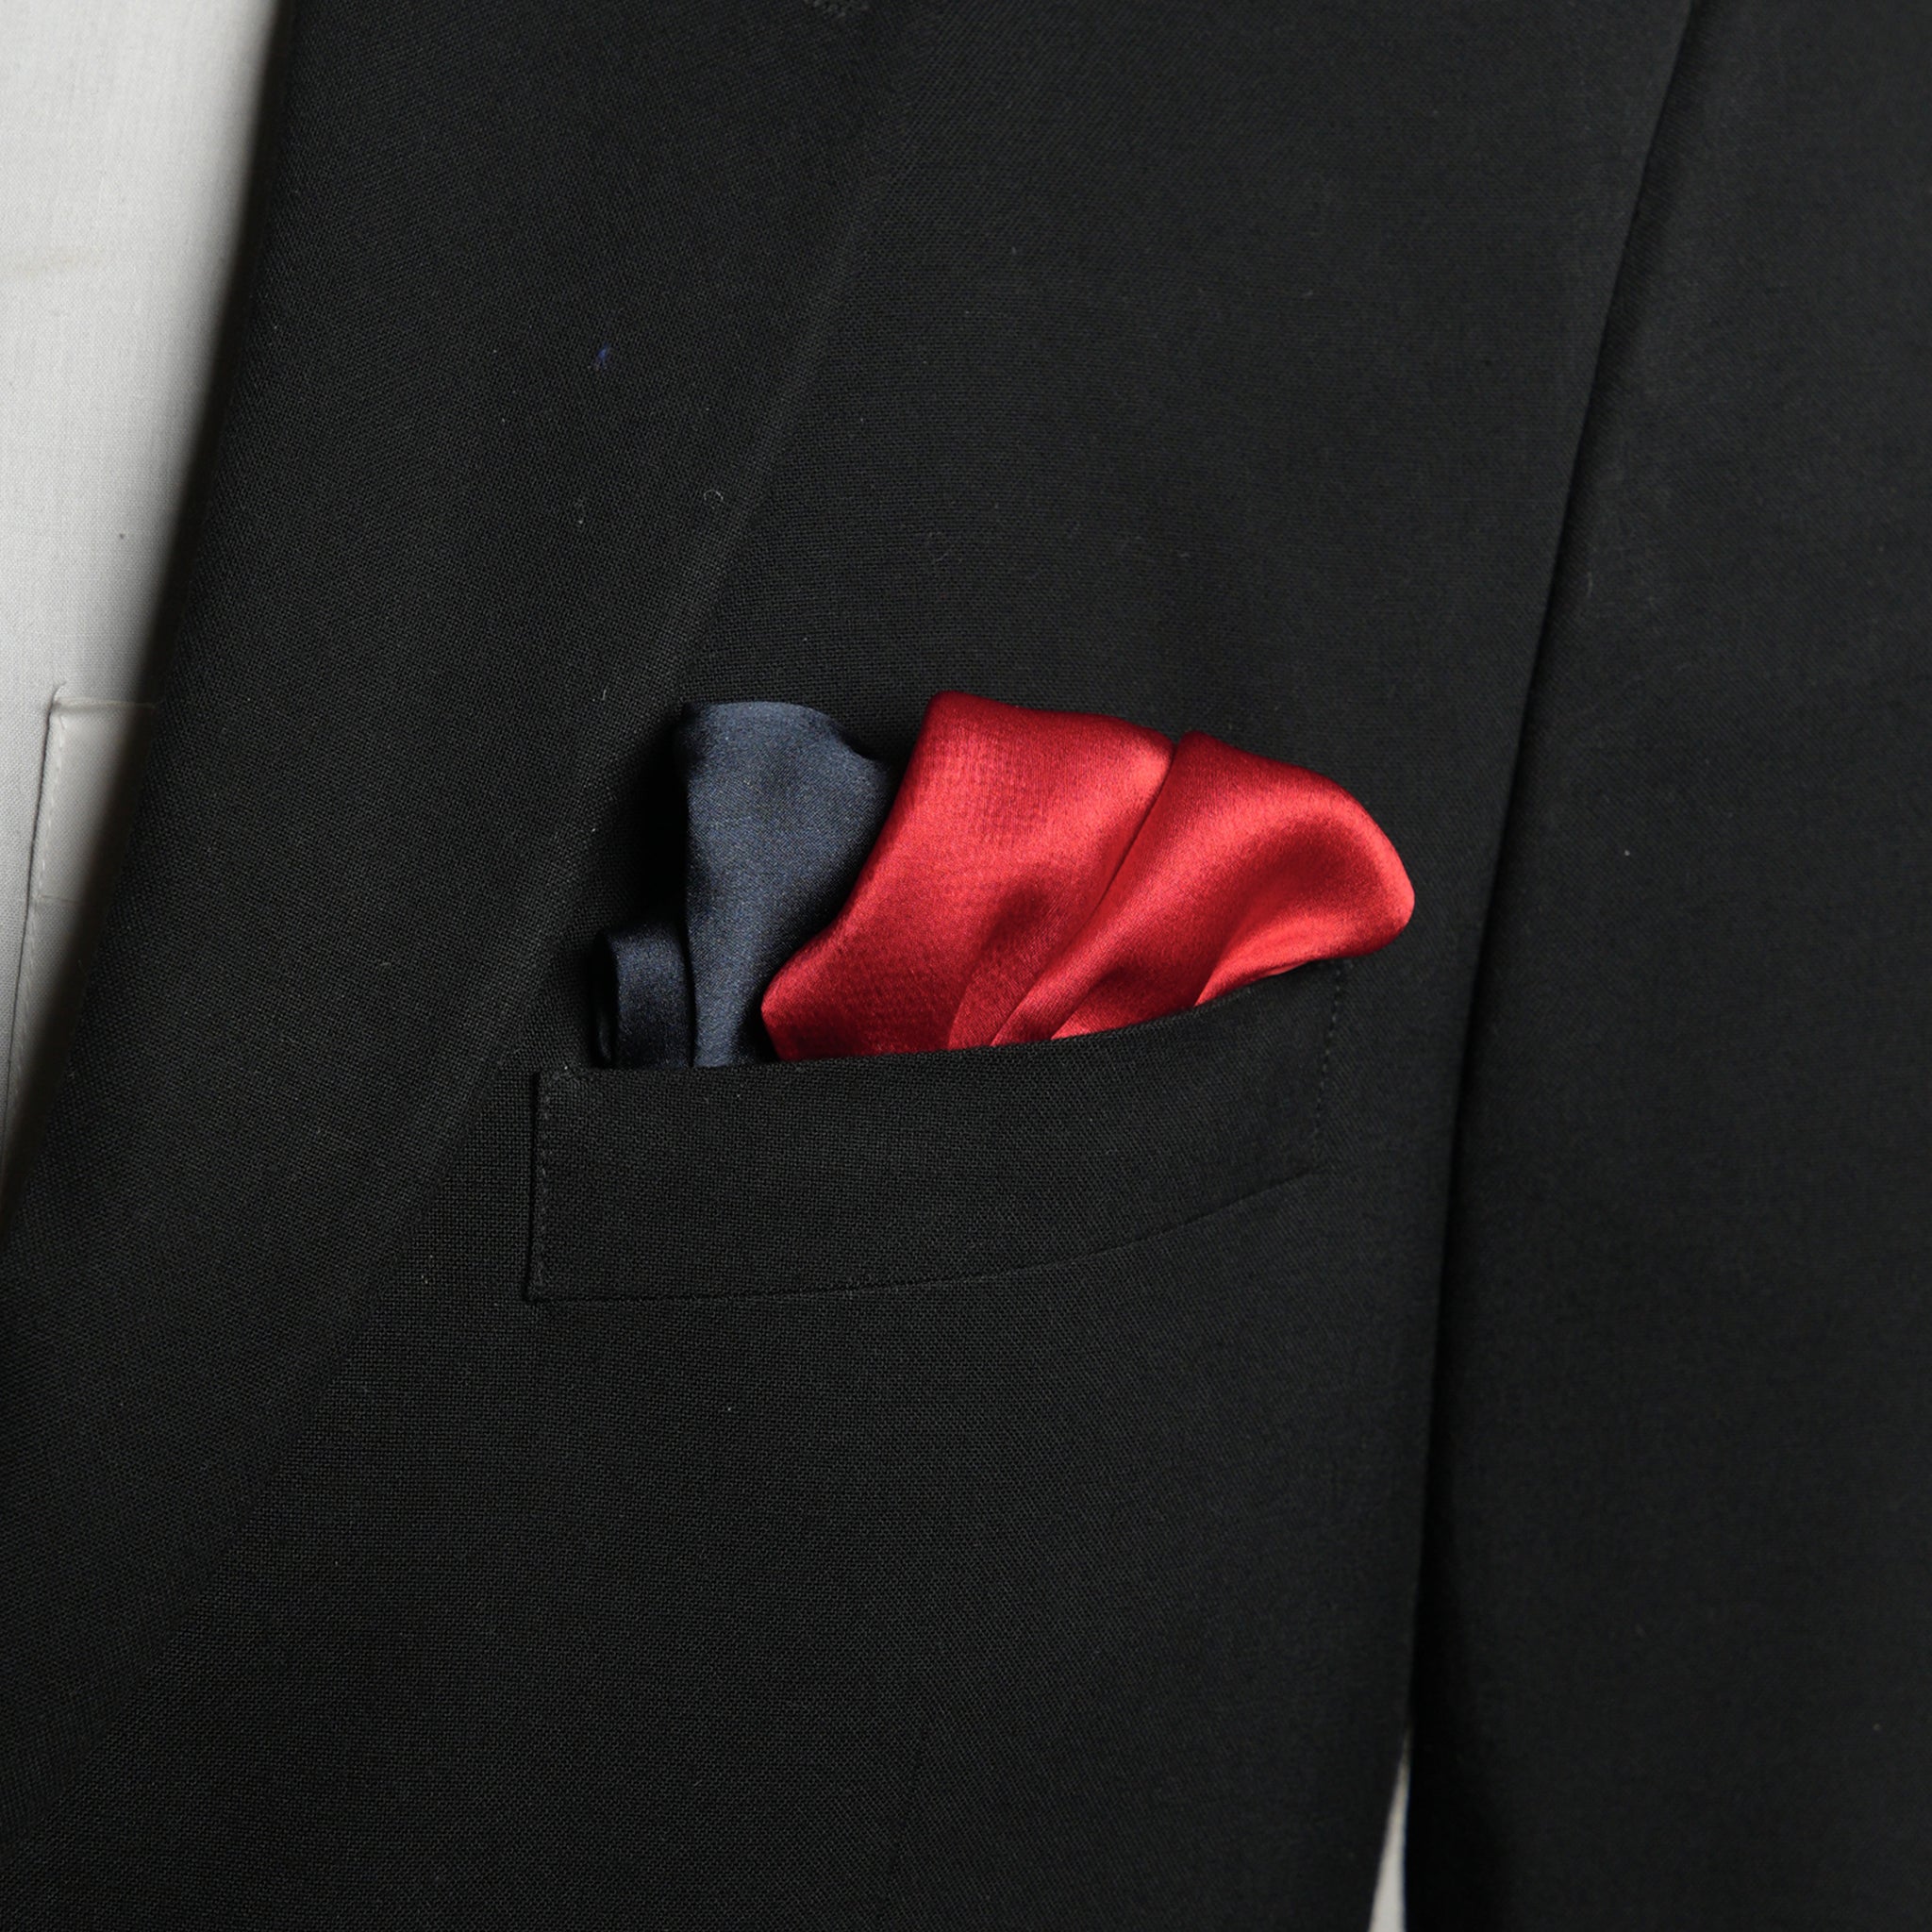 Chokore 2-in-1 Red & Navy Blue Silk Pocket Square - Solid Range